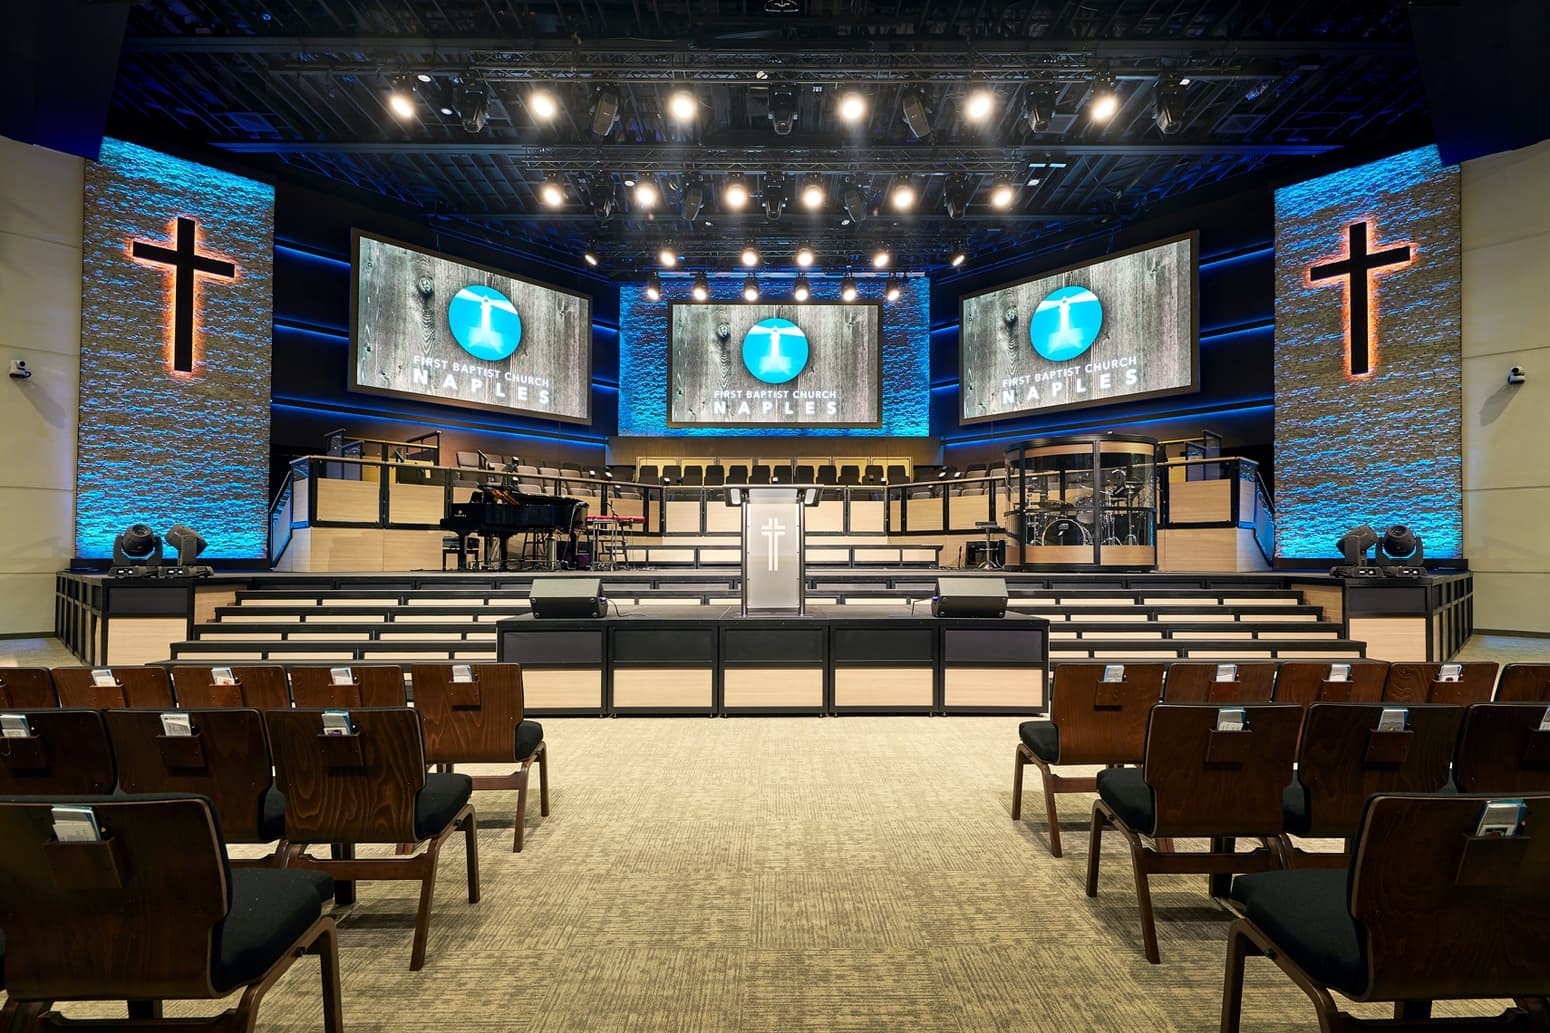 Church sound systems like we installed for FBC Naples feature the best speakers for church auditorium designs.